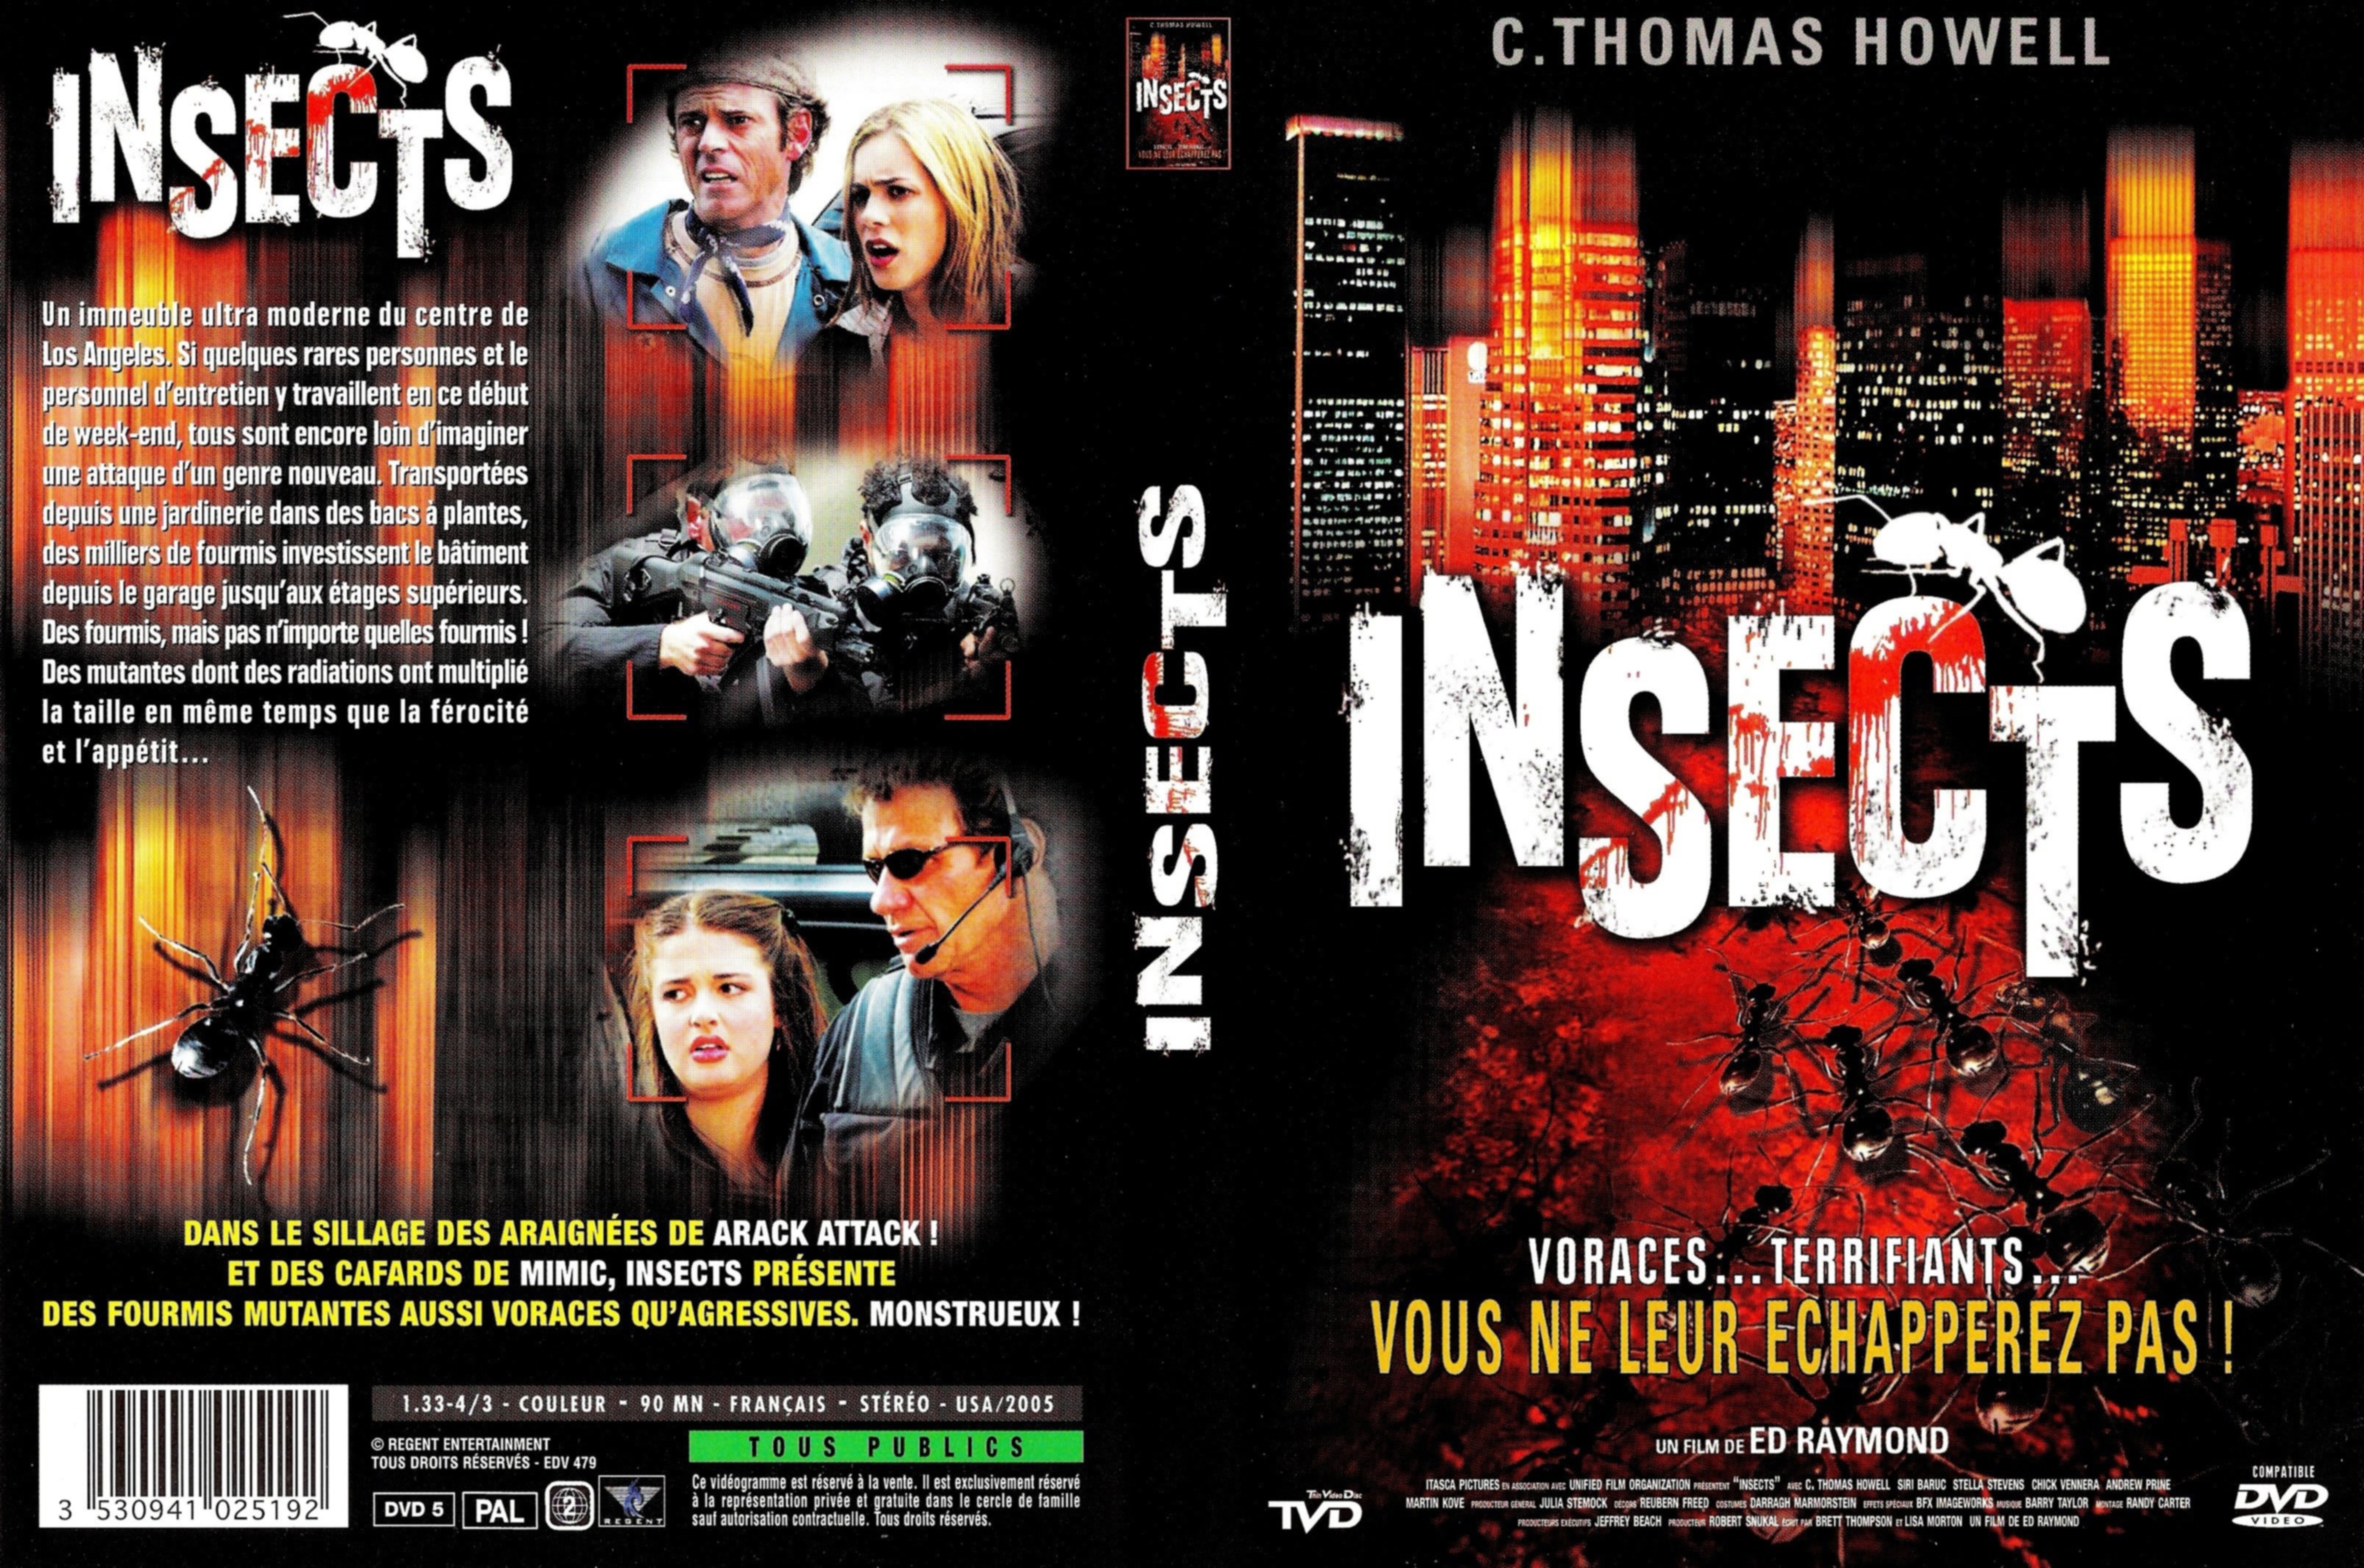 Jaquette DVD Insects v2